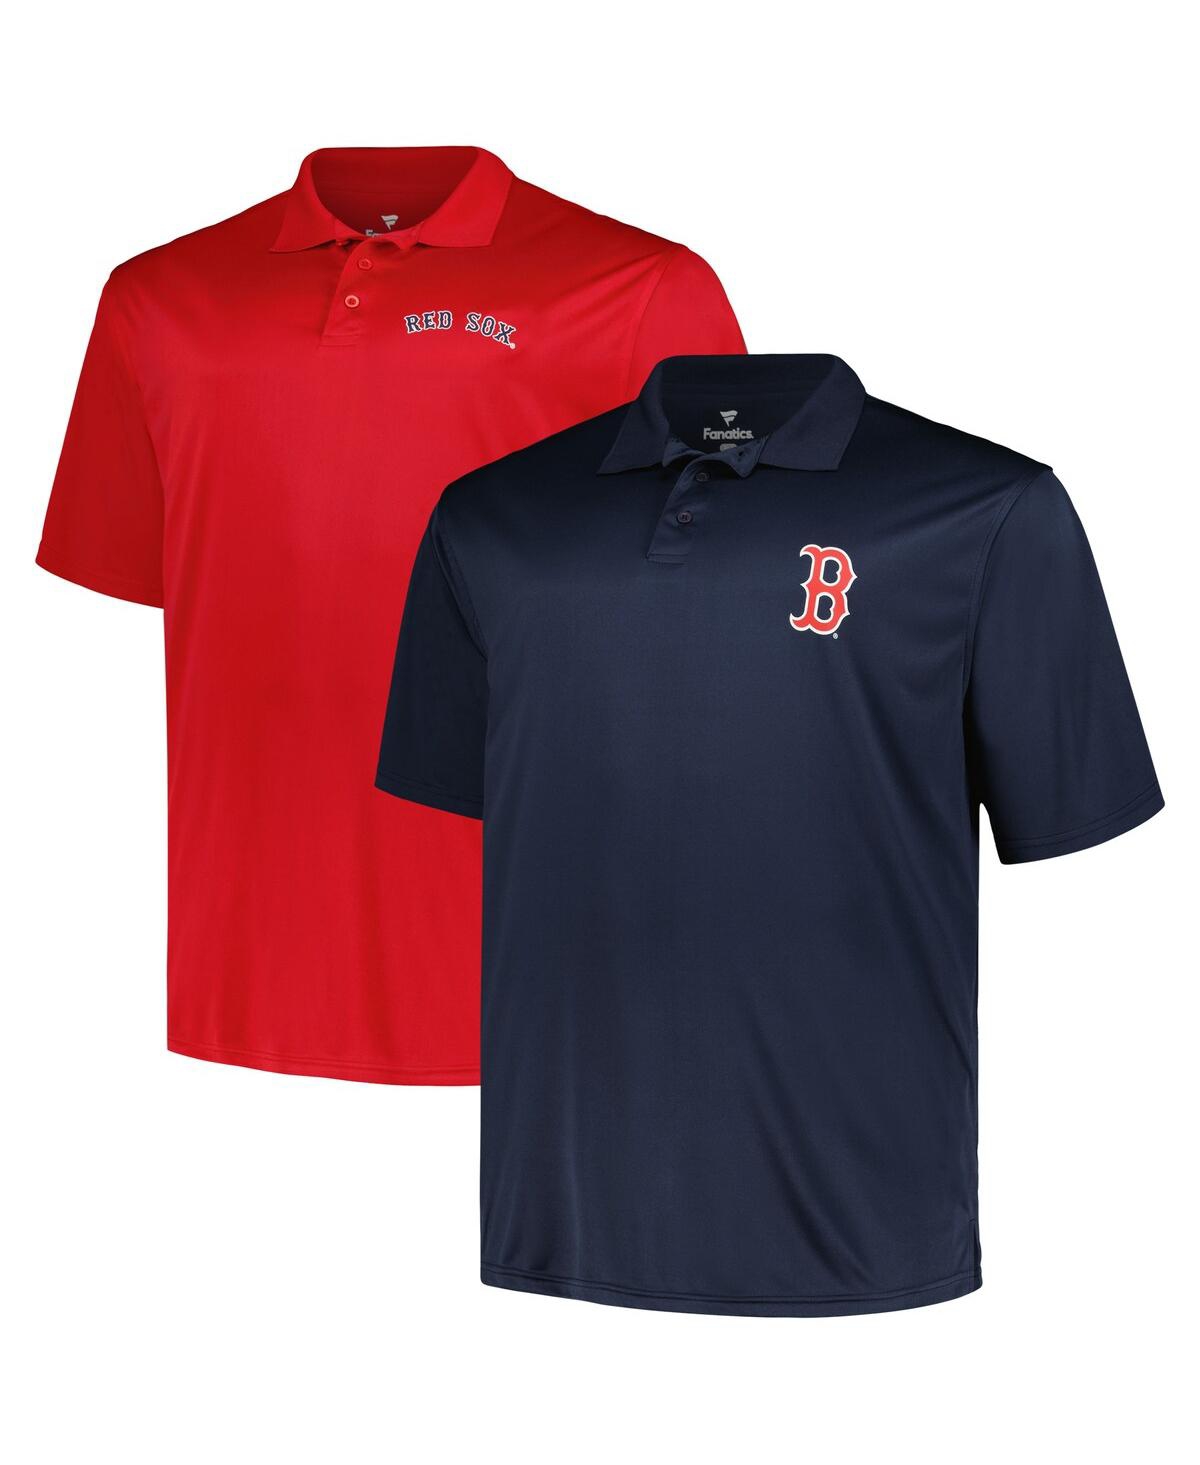 PROFILE MEN'S PROFILE NAVY, RED BOSTON RED SOX BIG AND TALL TWO-PACK SOLID POLO SHIRT SET